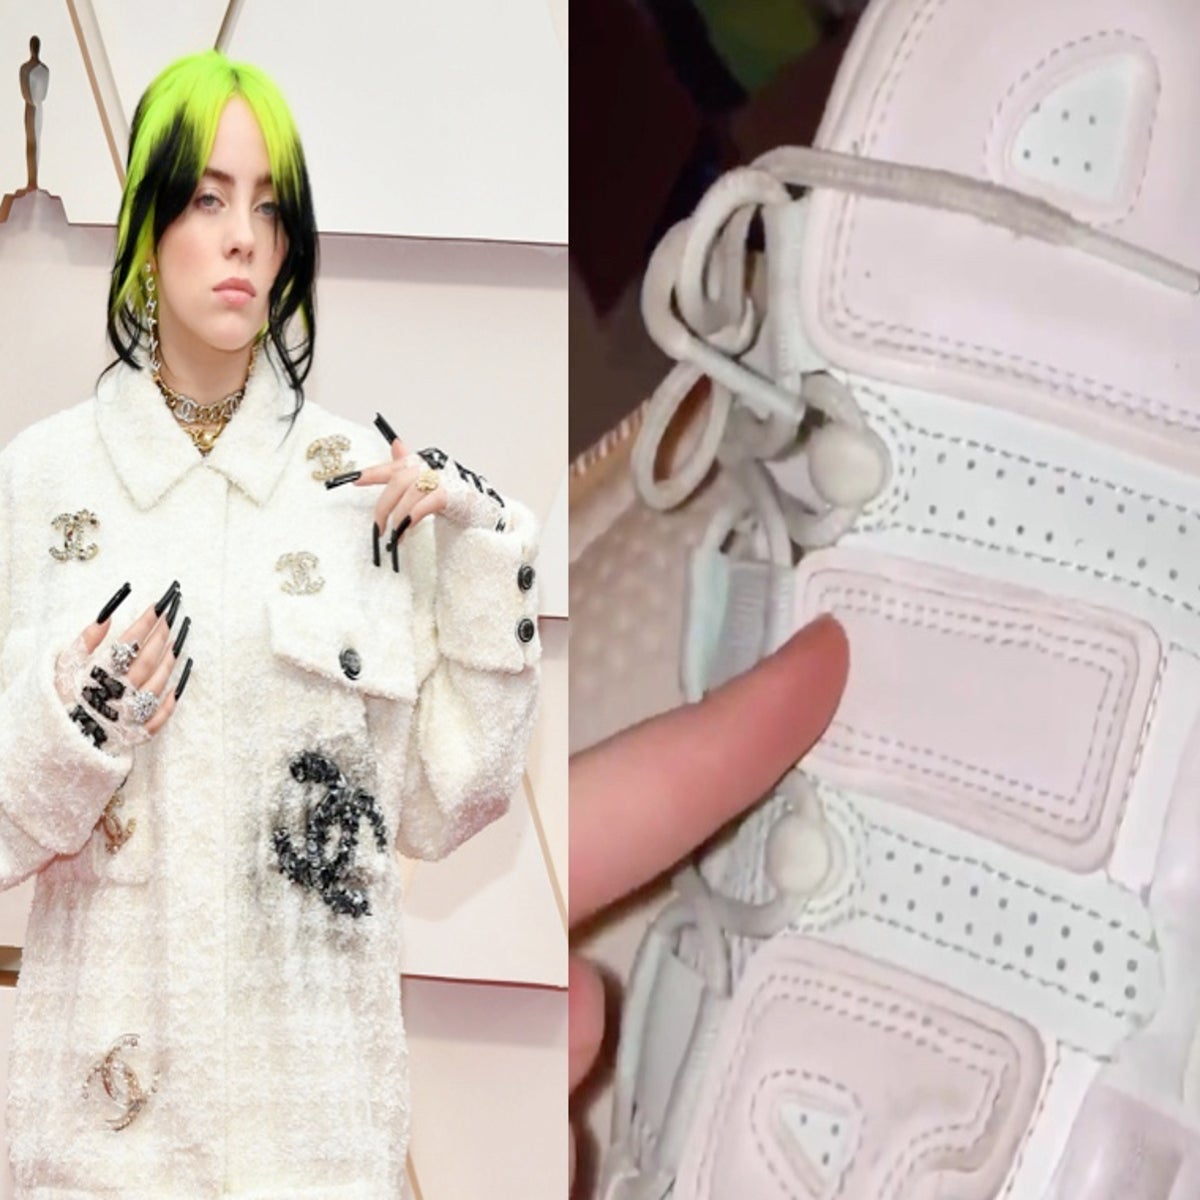 prompthunt: billie eilish with SILVER HAIR in Nike and Louis